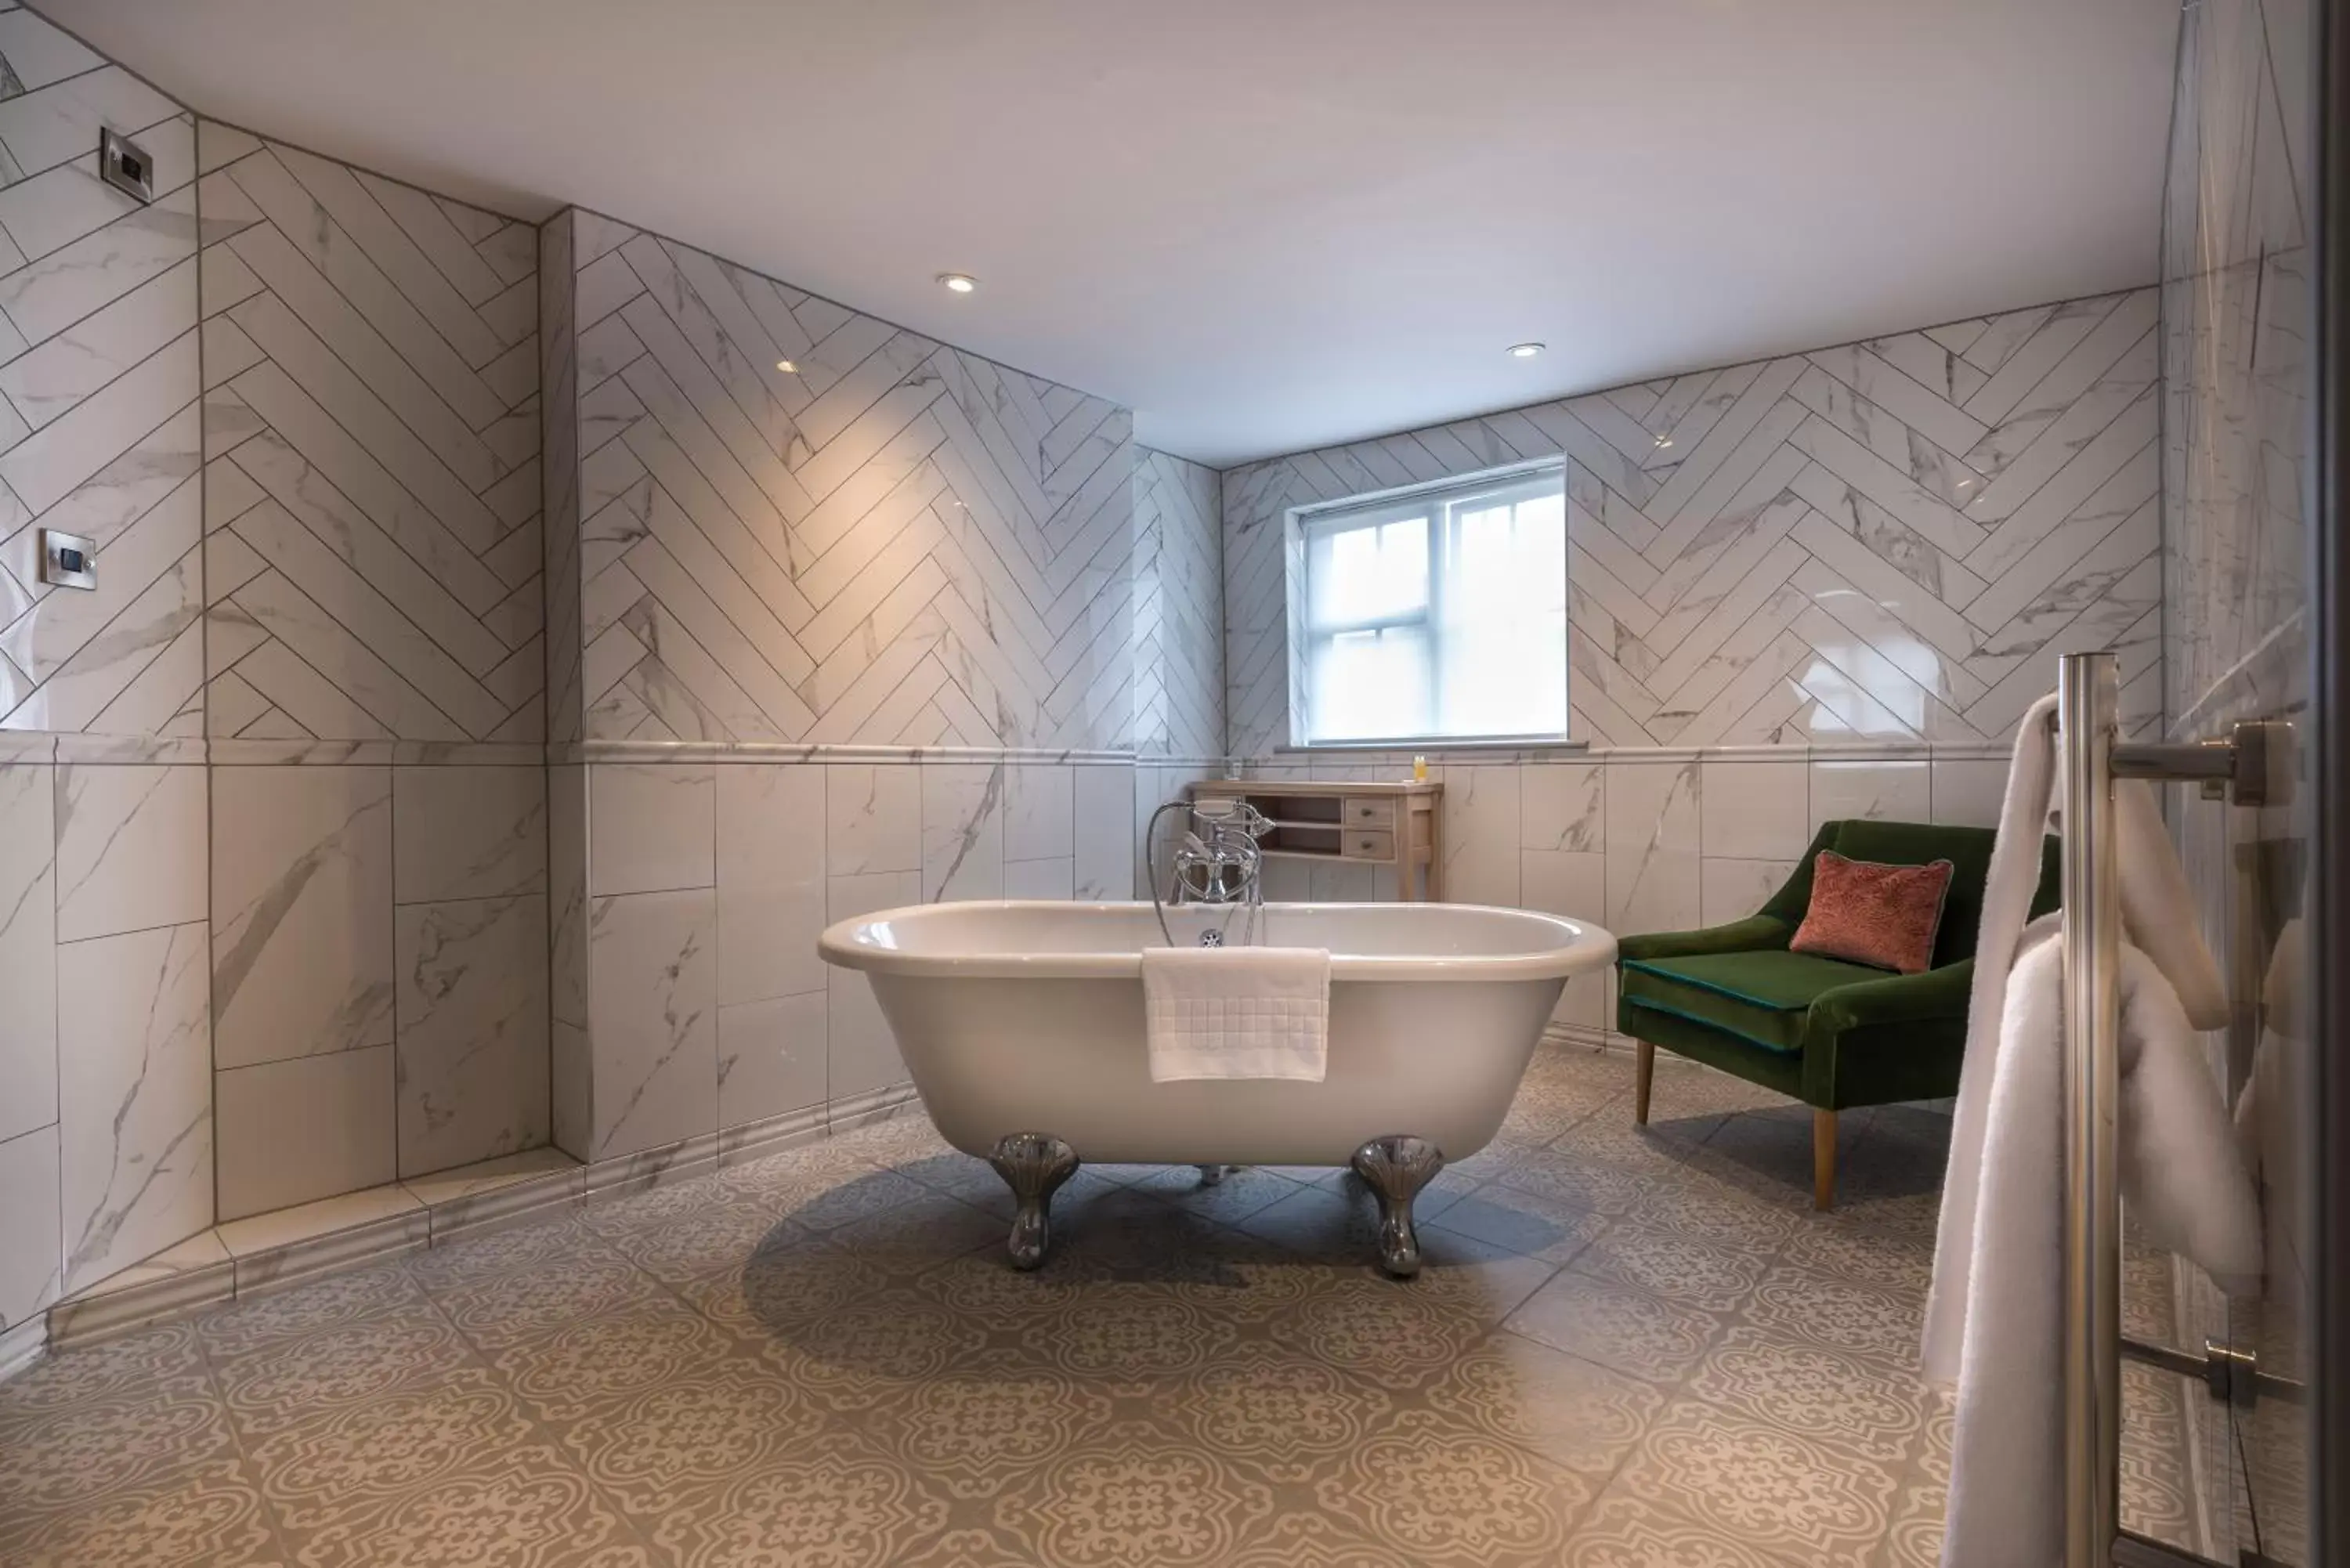 Bathroom in The Three Swans Hotel, Hungerford, Berkshire